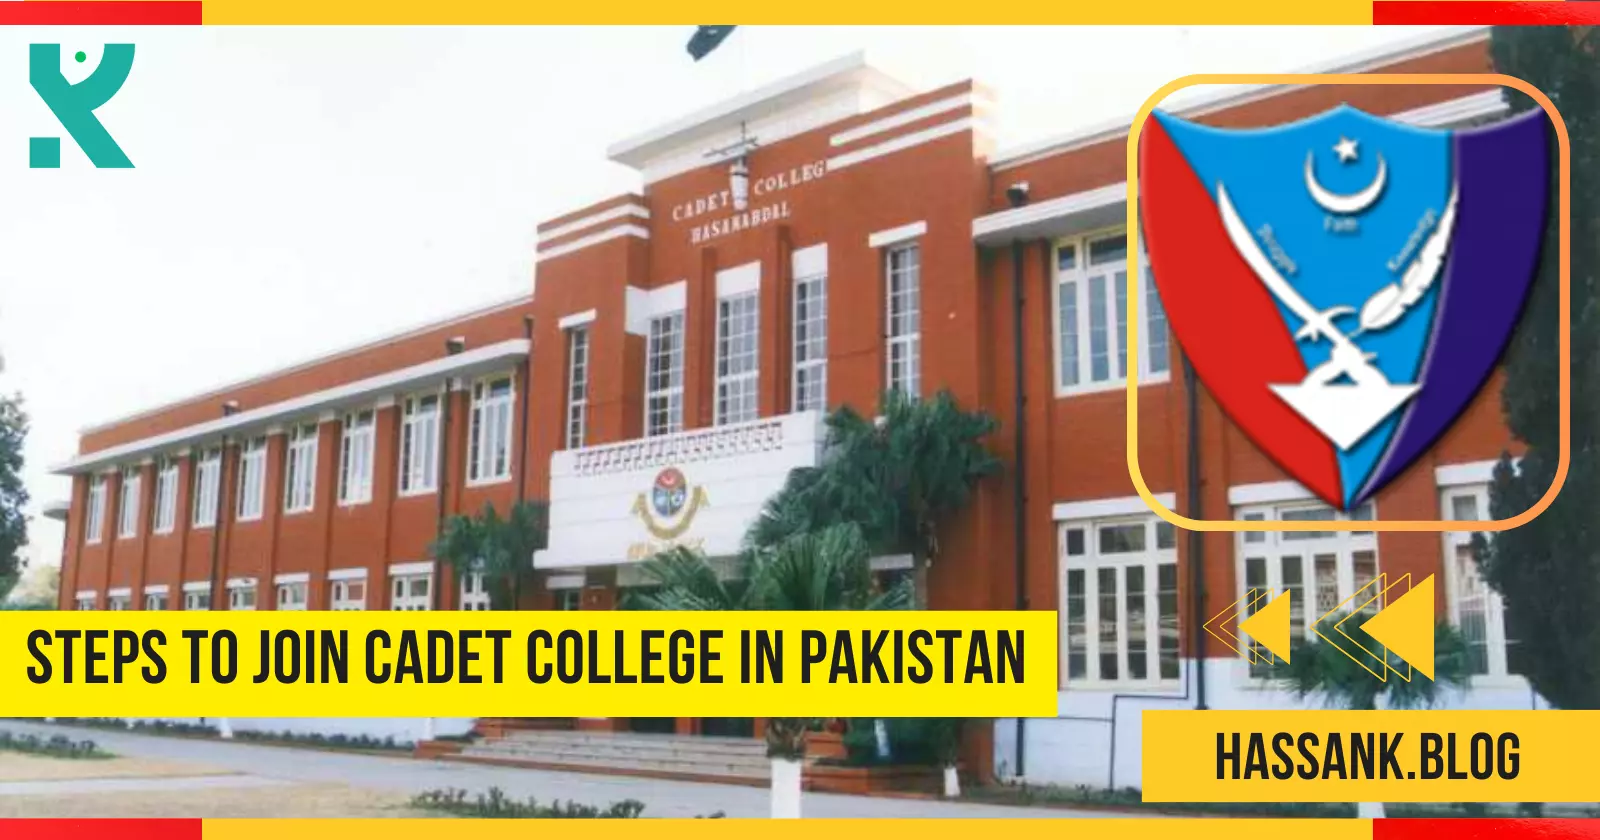 Steps to Join Cadet College in Pakistan